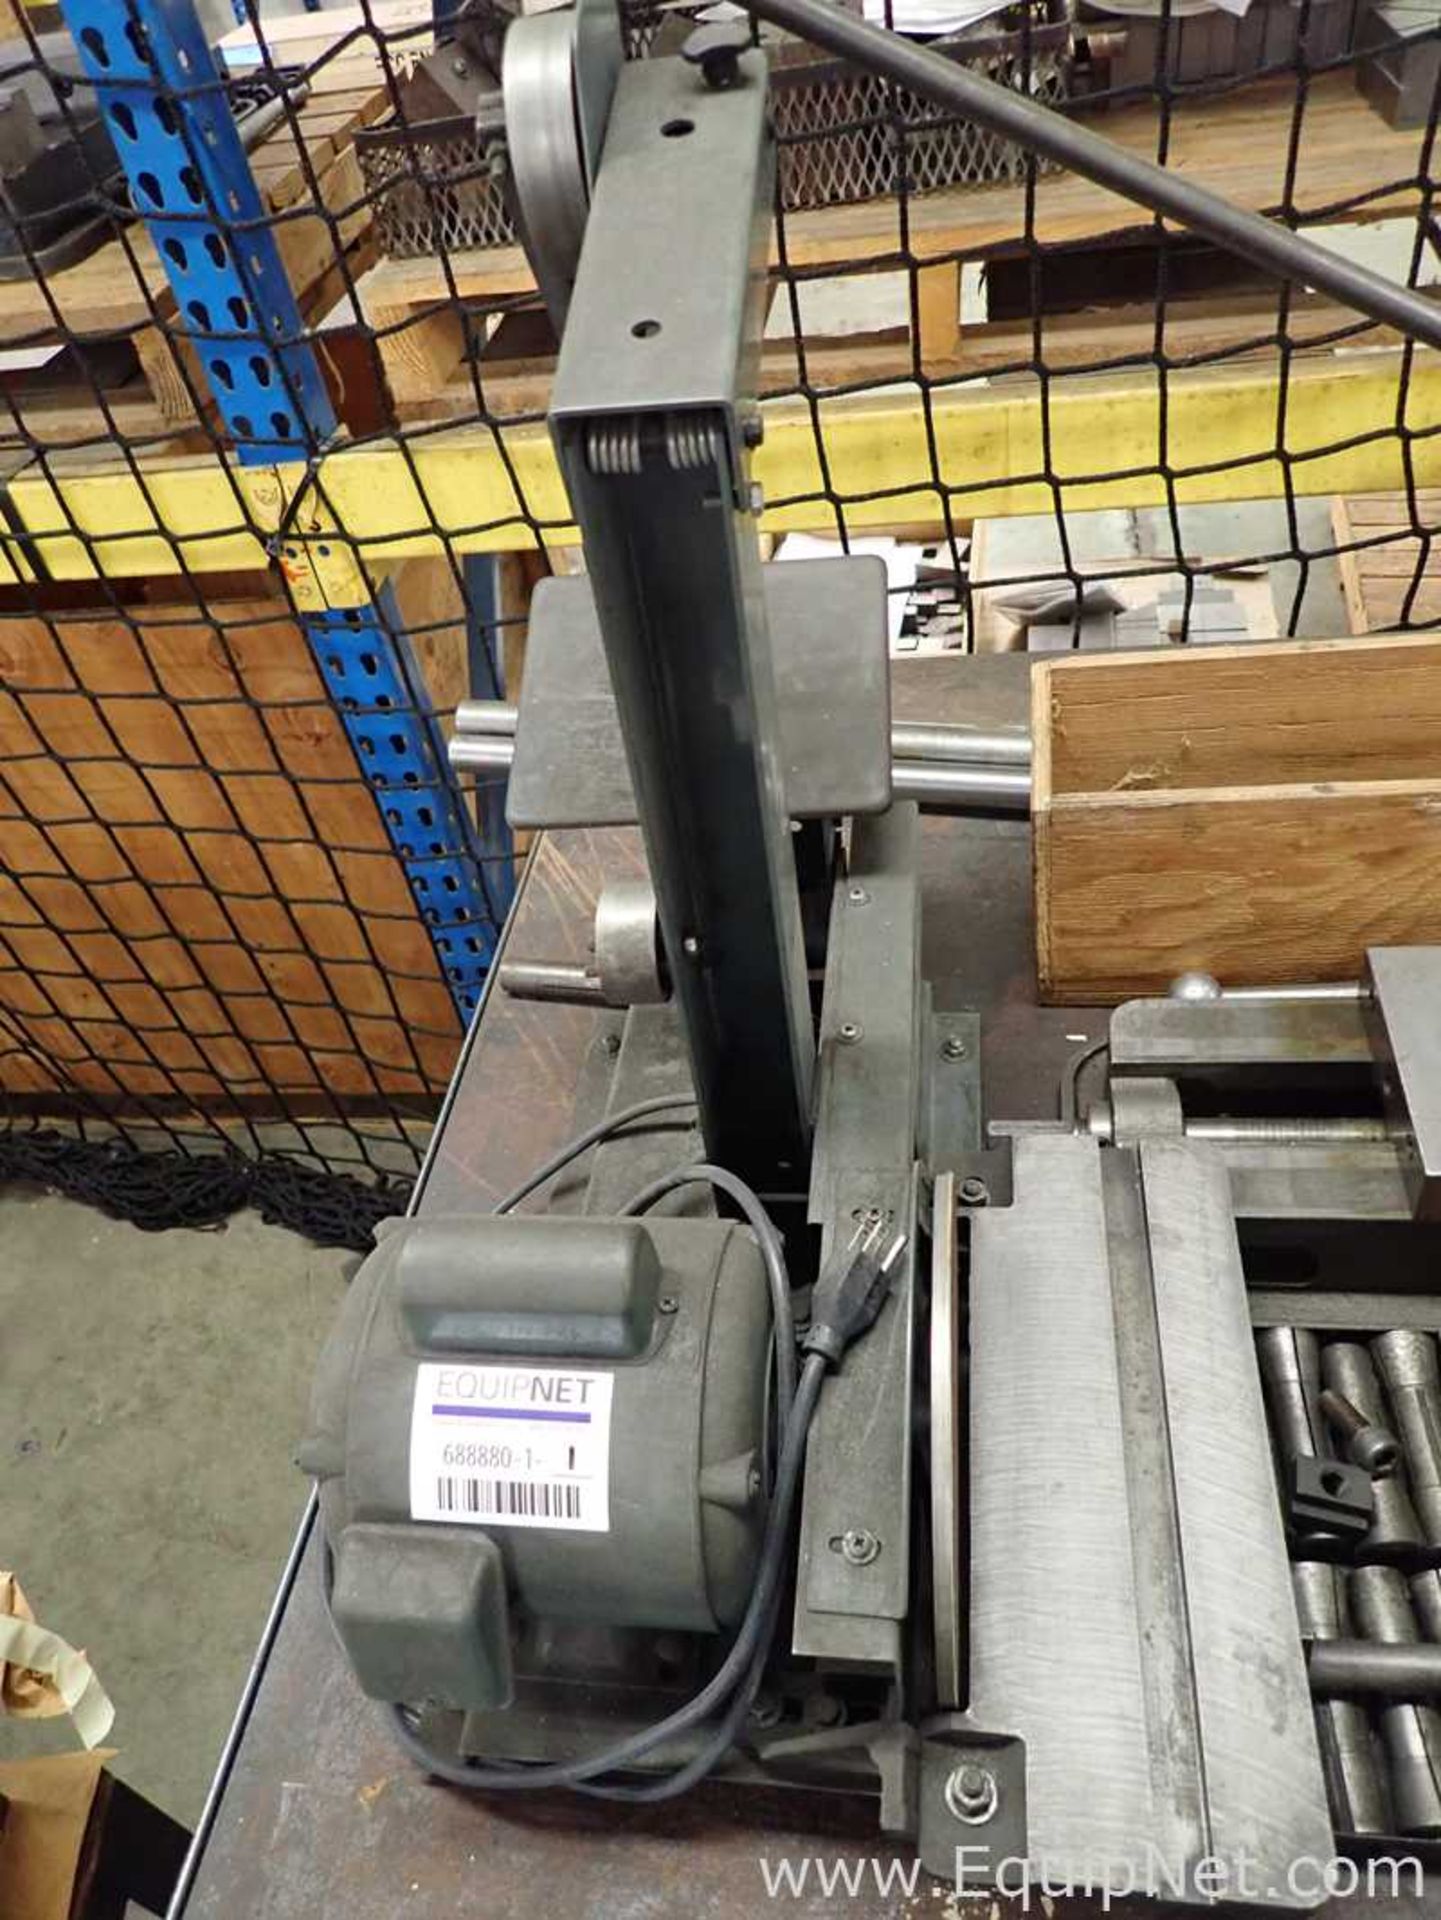 Enco 163-4512 1 Inch and 8 Inch Belt and Disc Sander - Image 3 of 4